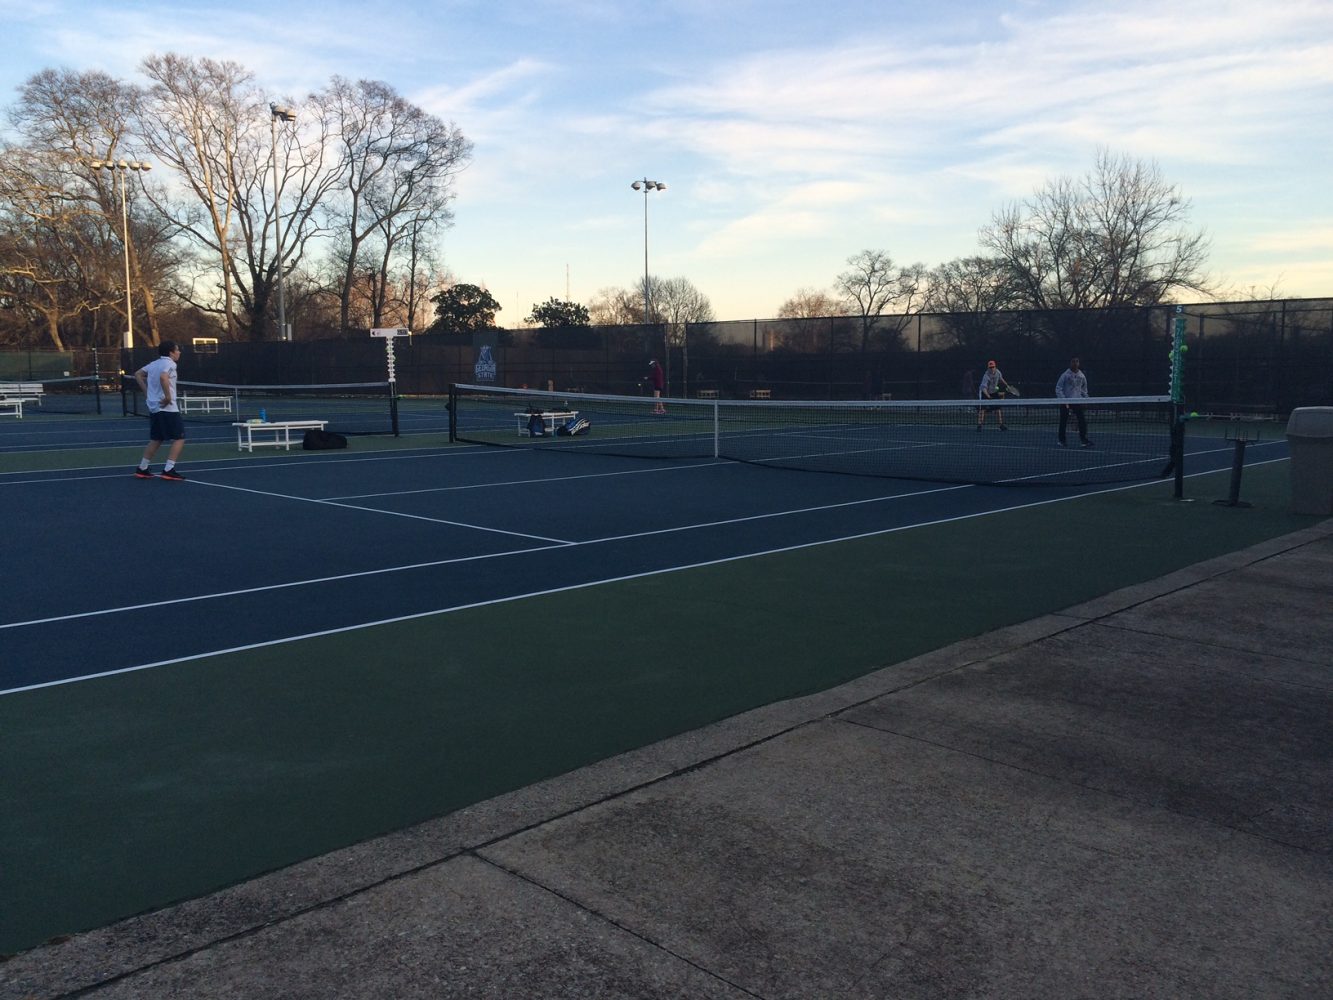 St. Pius serves up mixed results for Grady tennis